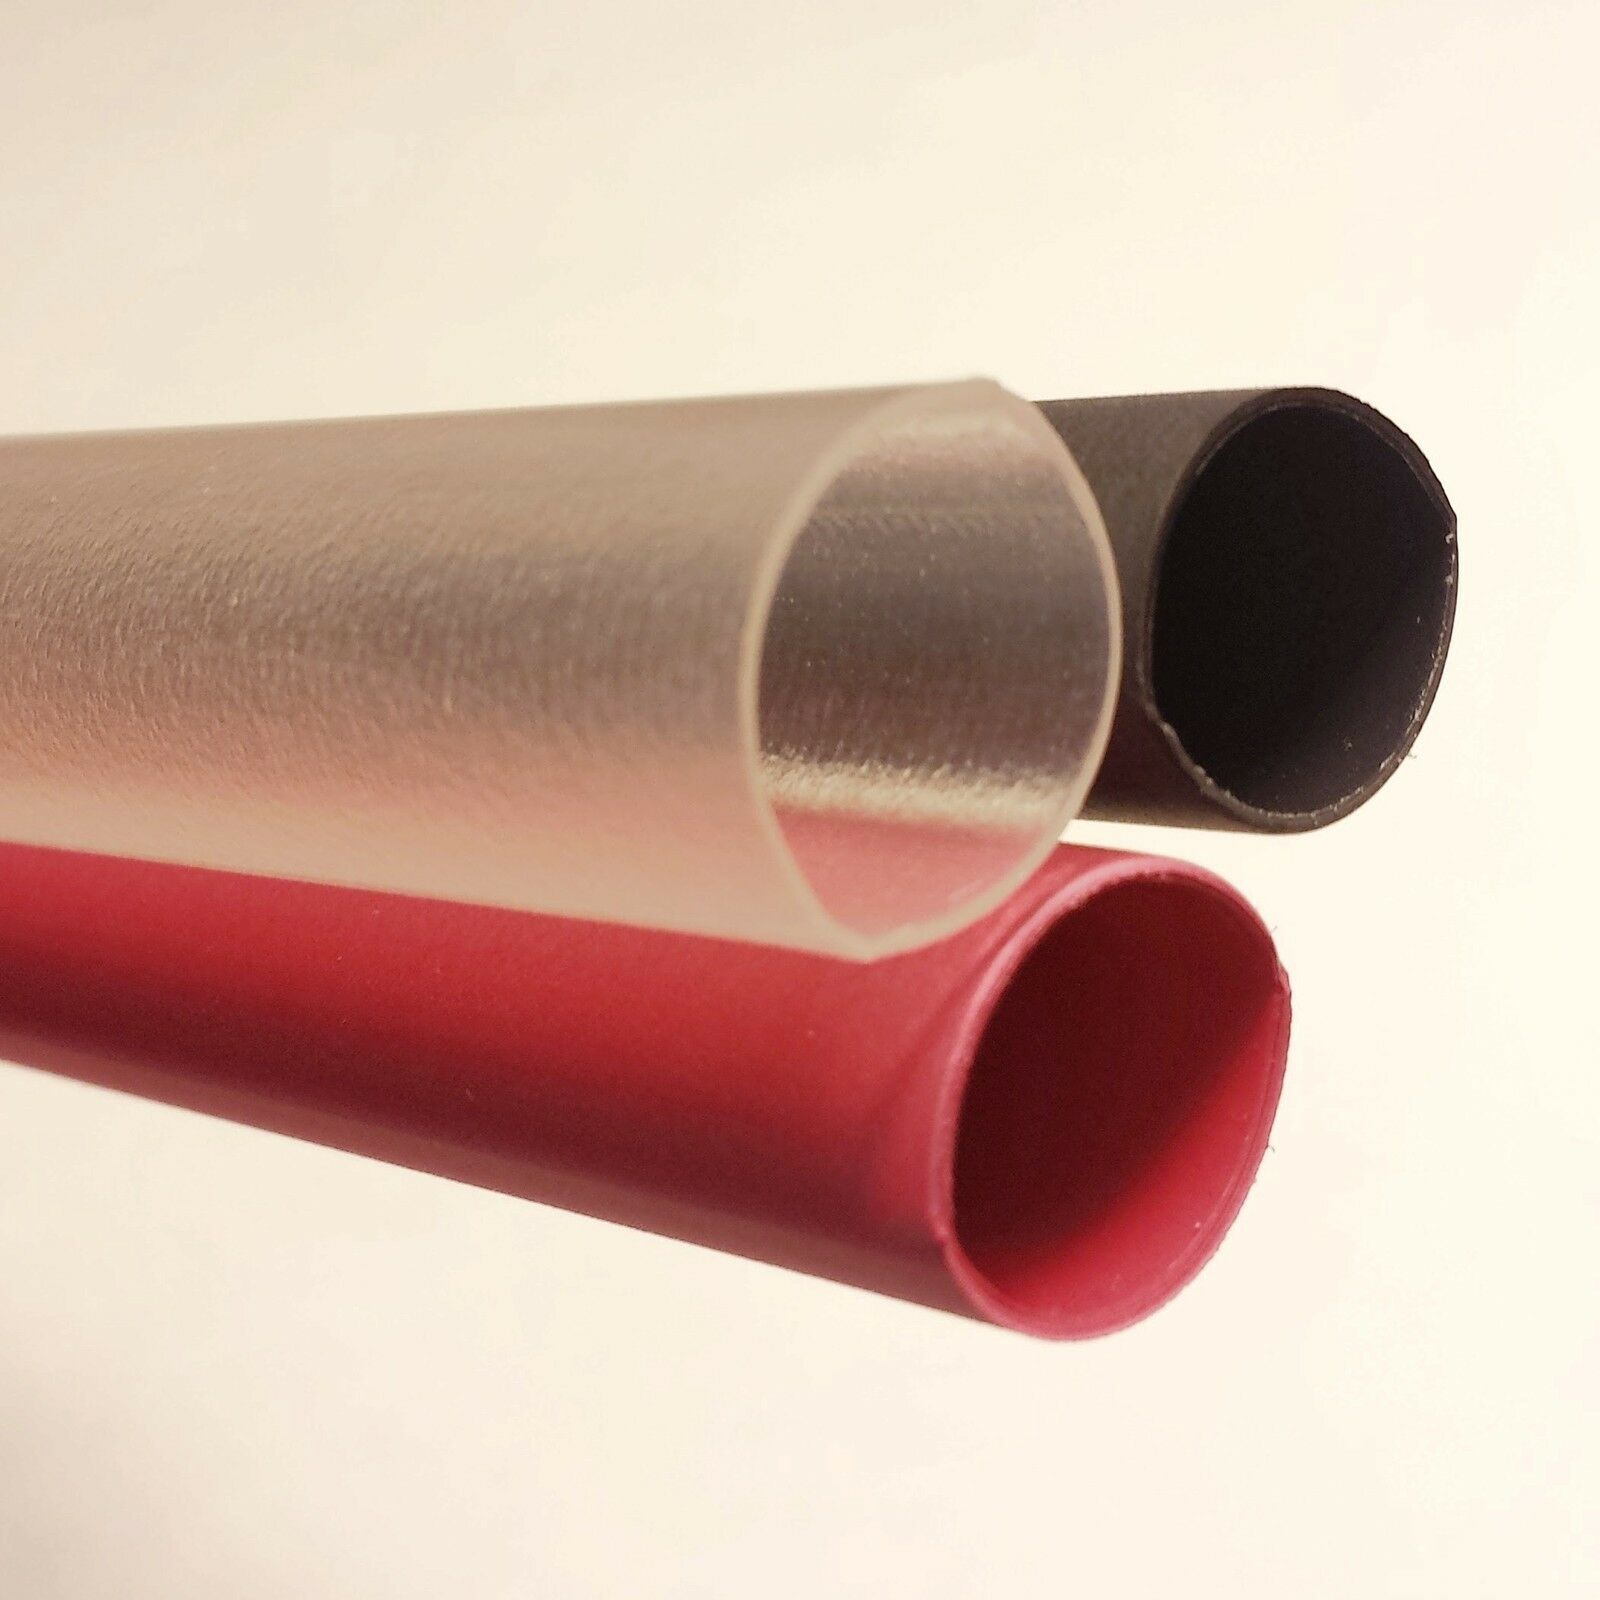 Heat Shrink Tubing 3:1 Adhesive Glue Lined Tubes 12 Inch Lengths Red/black/clear